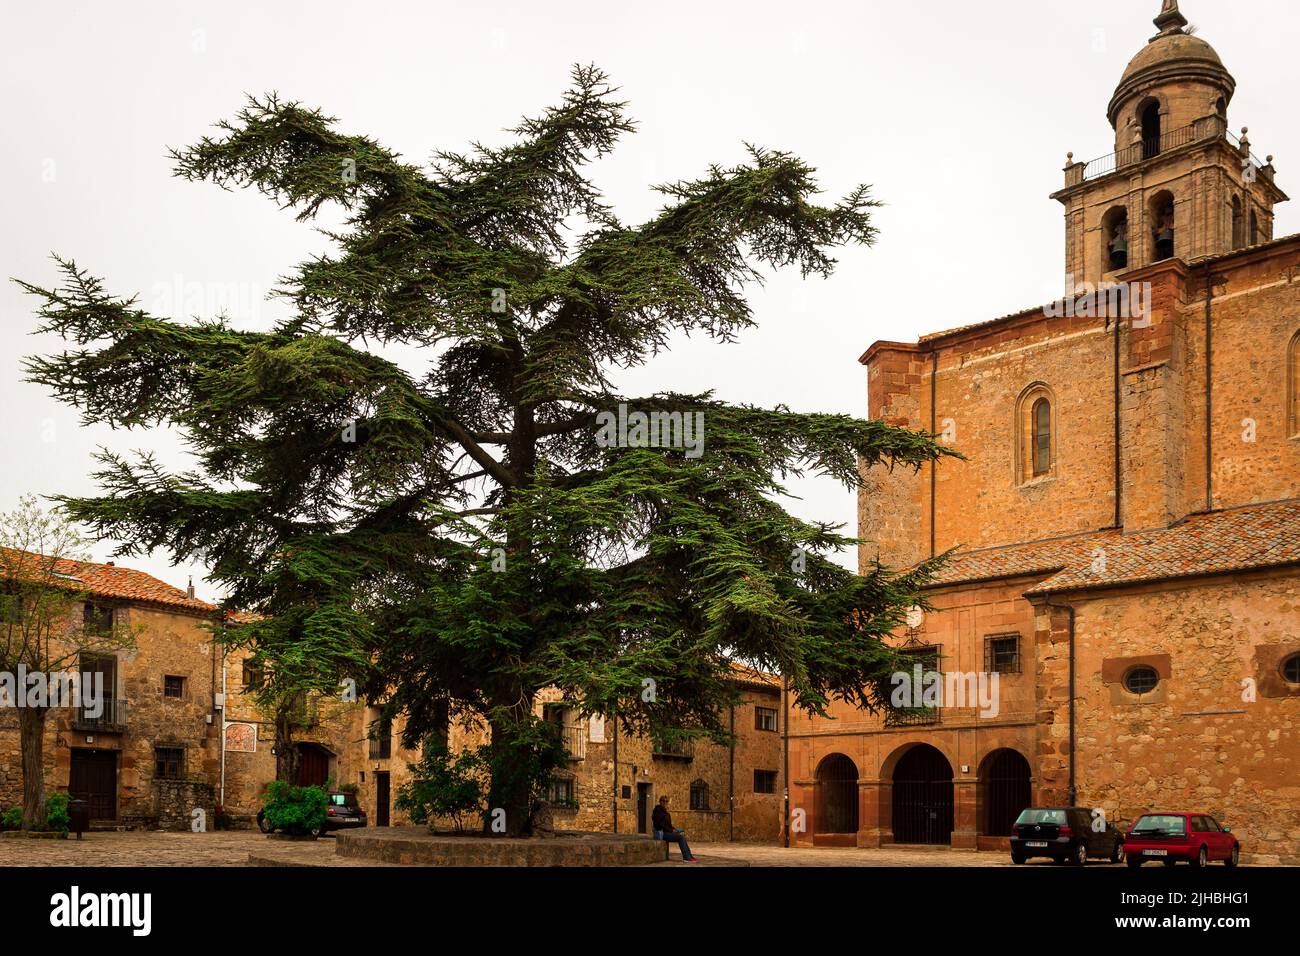 Large Spanish Fir in town plaza Stock Photo